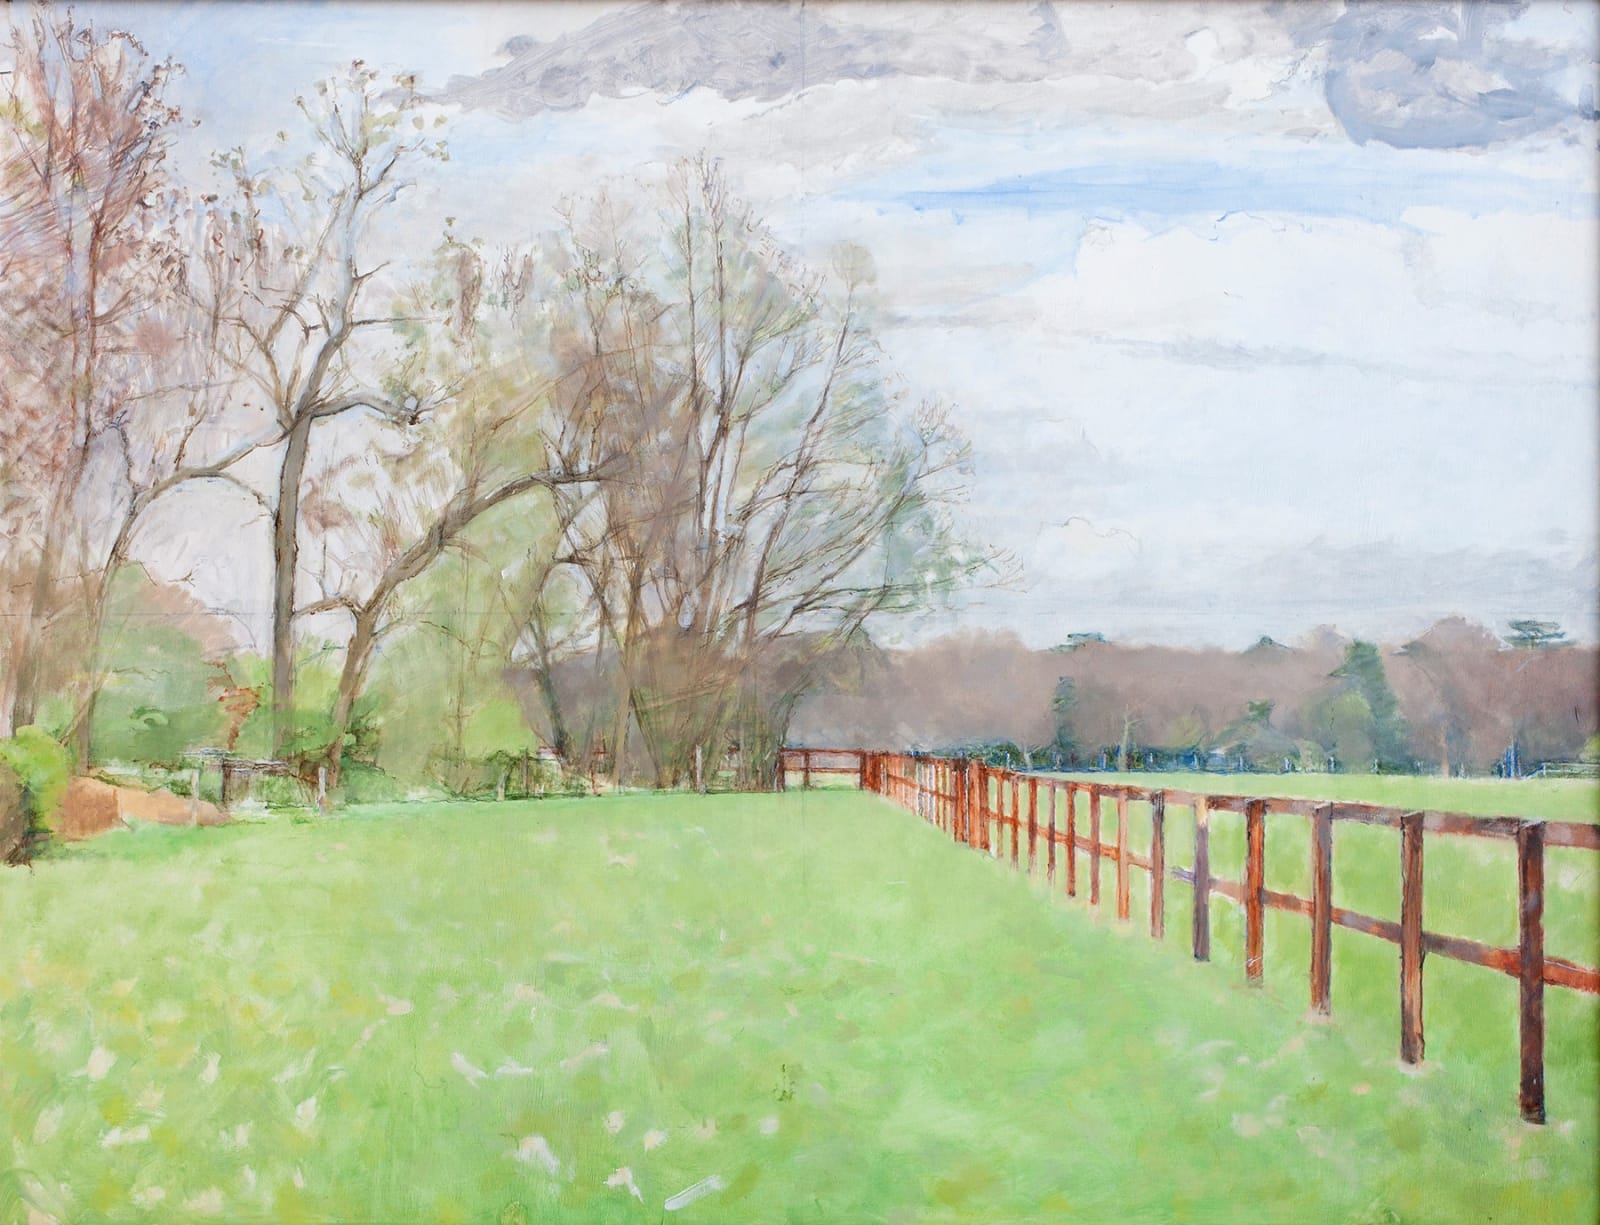 PATRICK GEORGE, New Fence to the Right, 2003